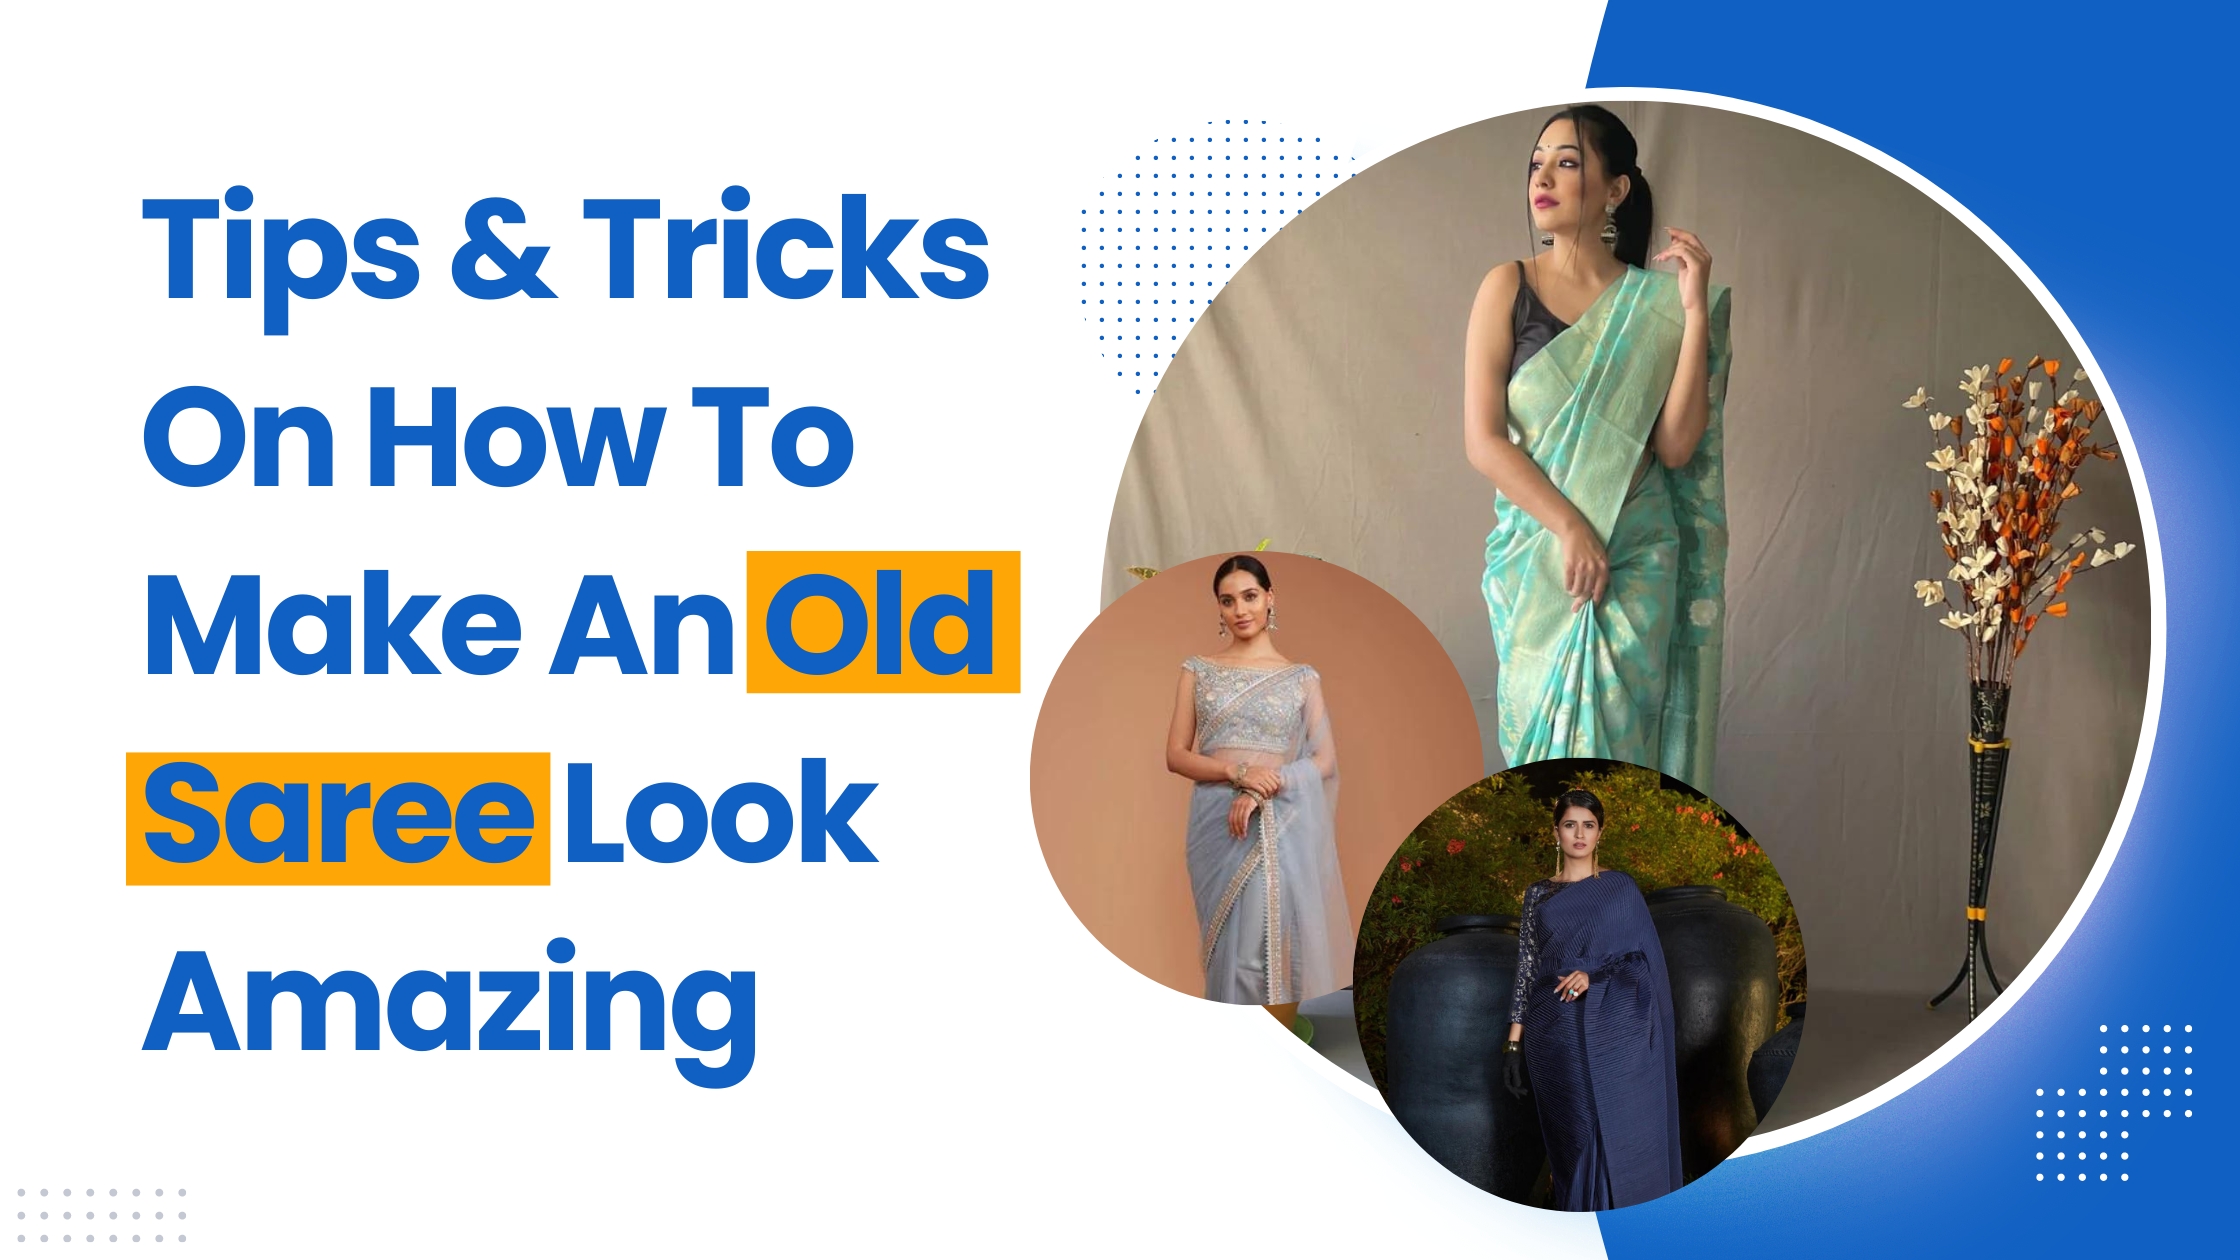 Tips & Tricks On How To Make An Old Saree Look Amazing